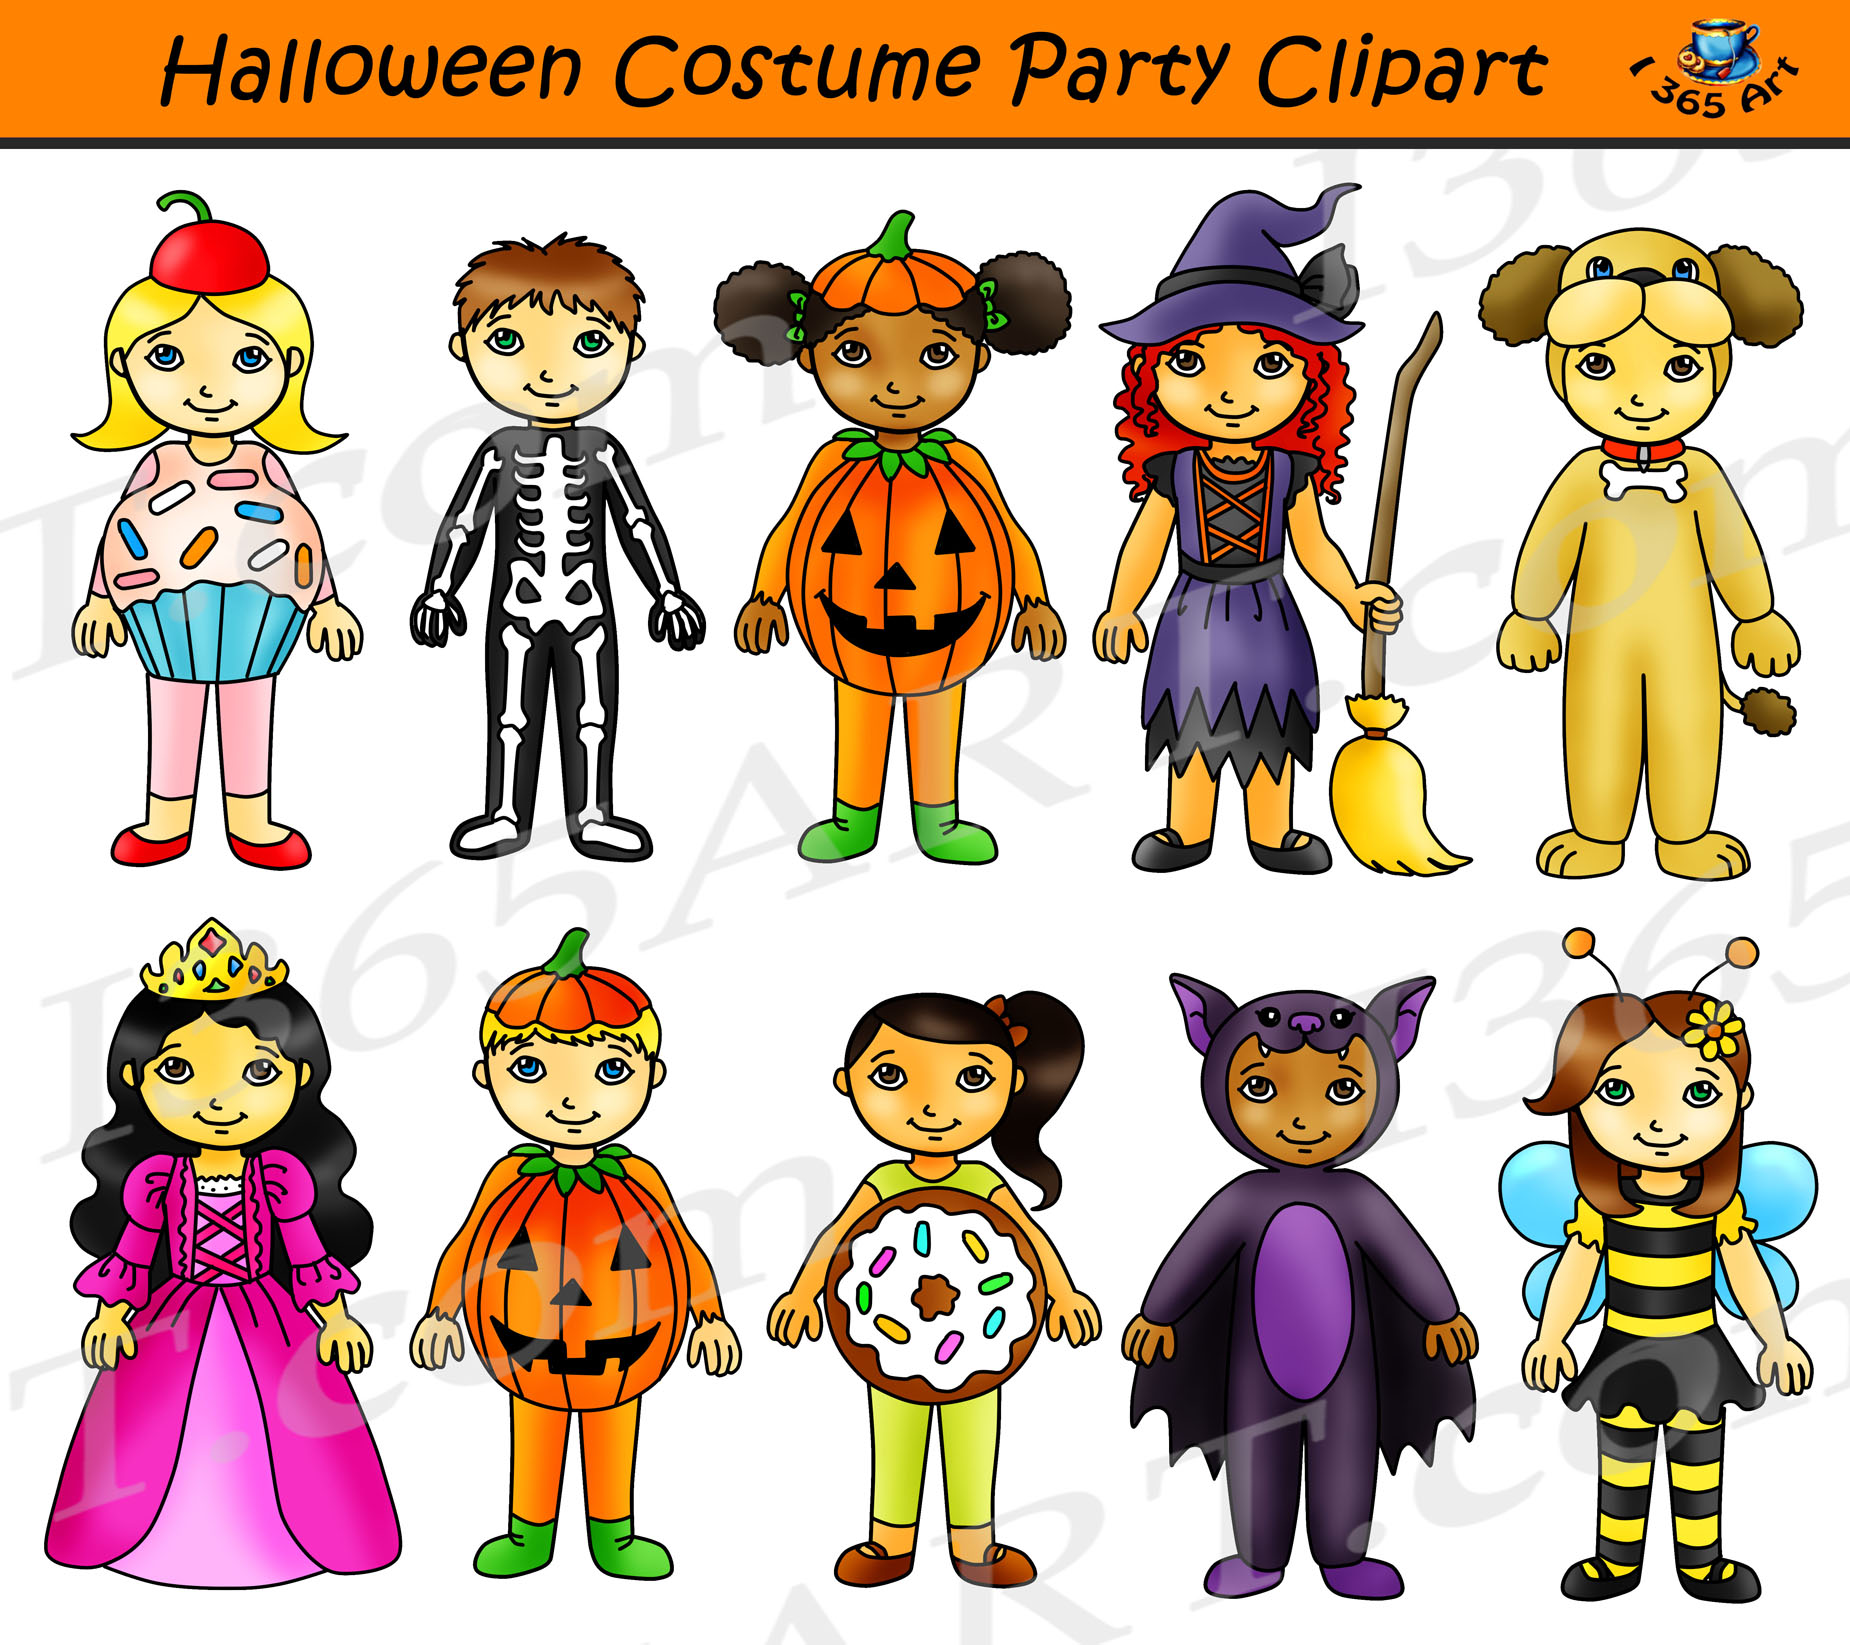 Halloween Costume Party Clipart.